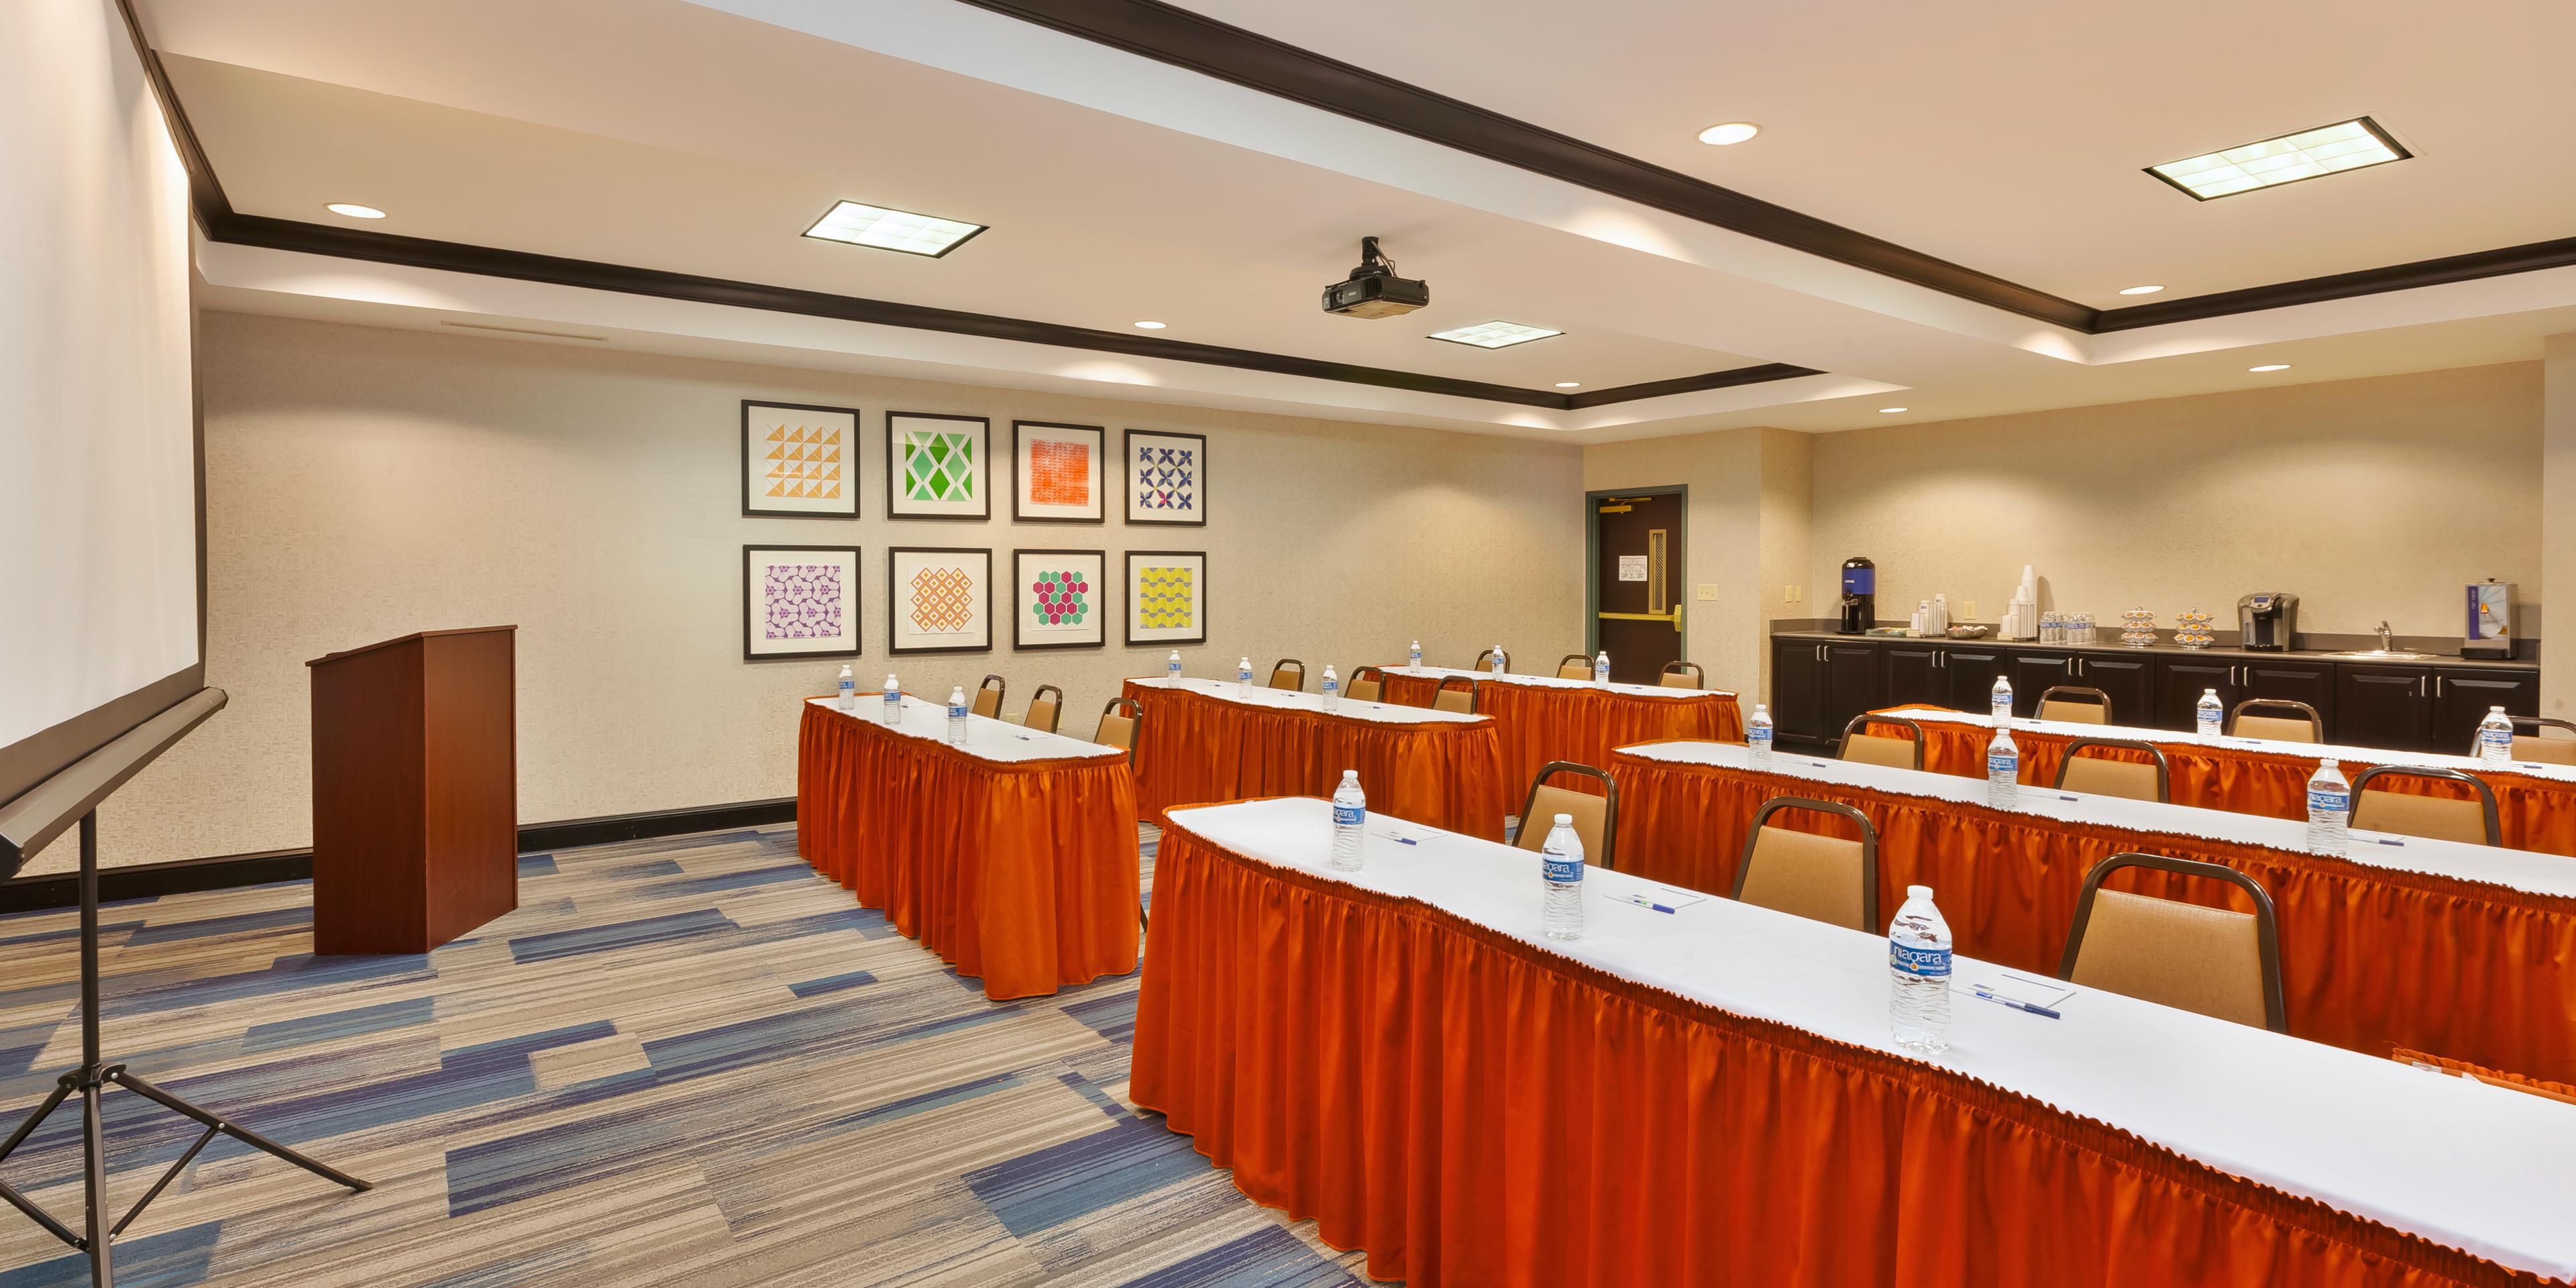 With meeting space for up to 60 guests theater style, 32 classroom style or up to 20 guests U- Shape. We also offer complimentary Wi-Fi access throughout the building and complimentary parking for meeting attendees. We are ready to help you host your next meeting or event in Warminster, PA!